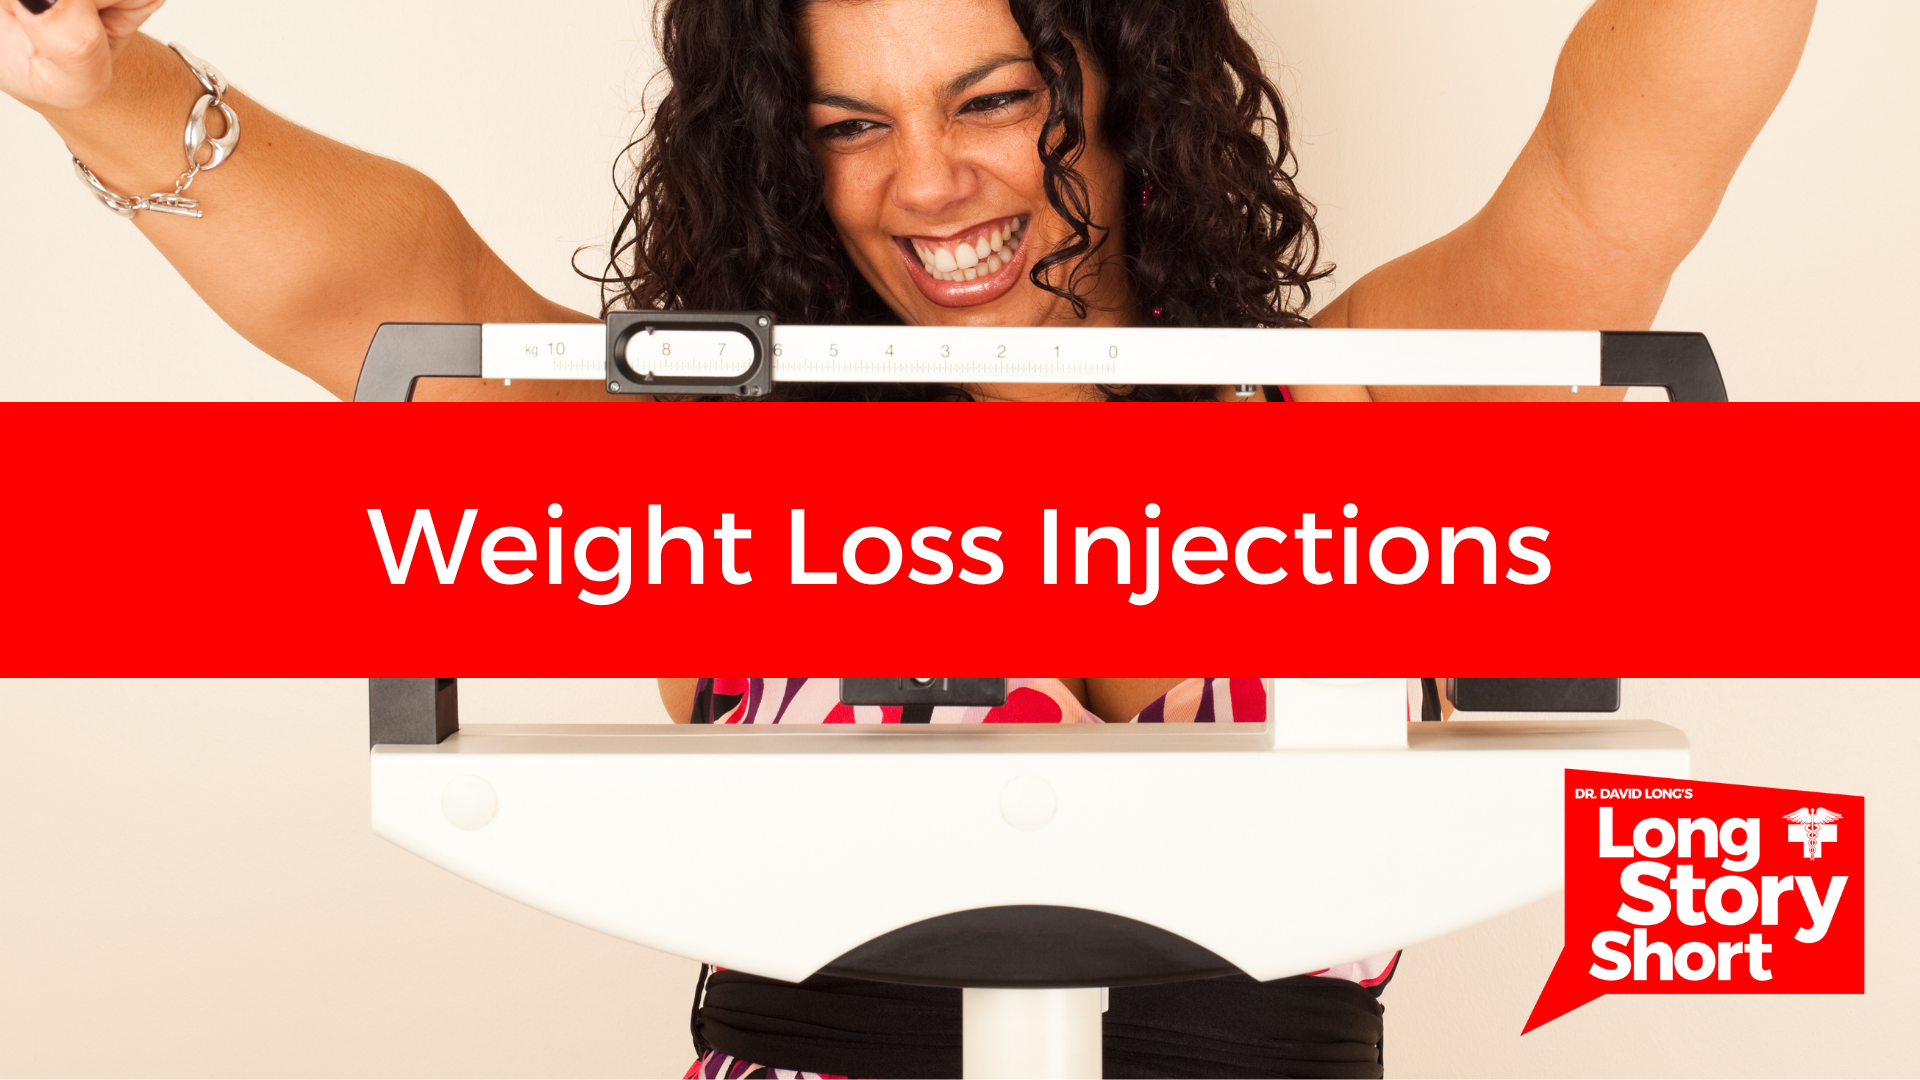 You are currently viewing Weight Loss Injections – Dr. David Long